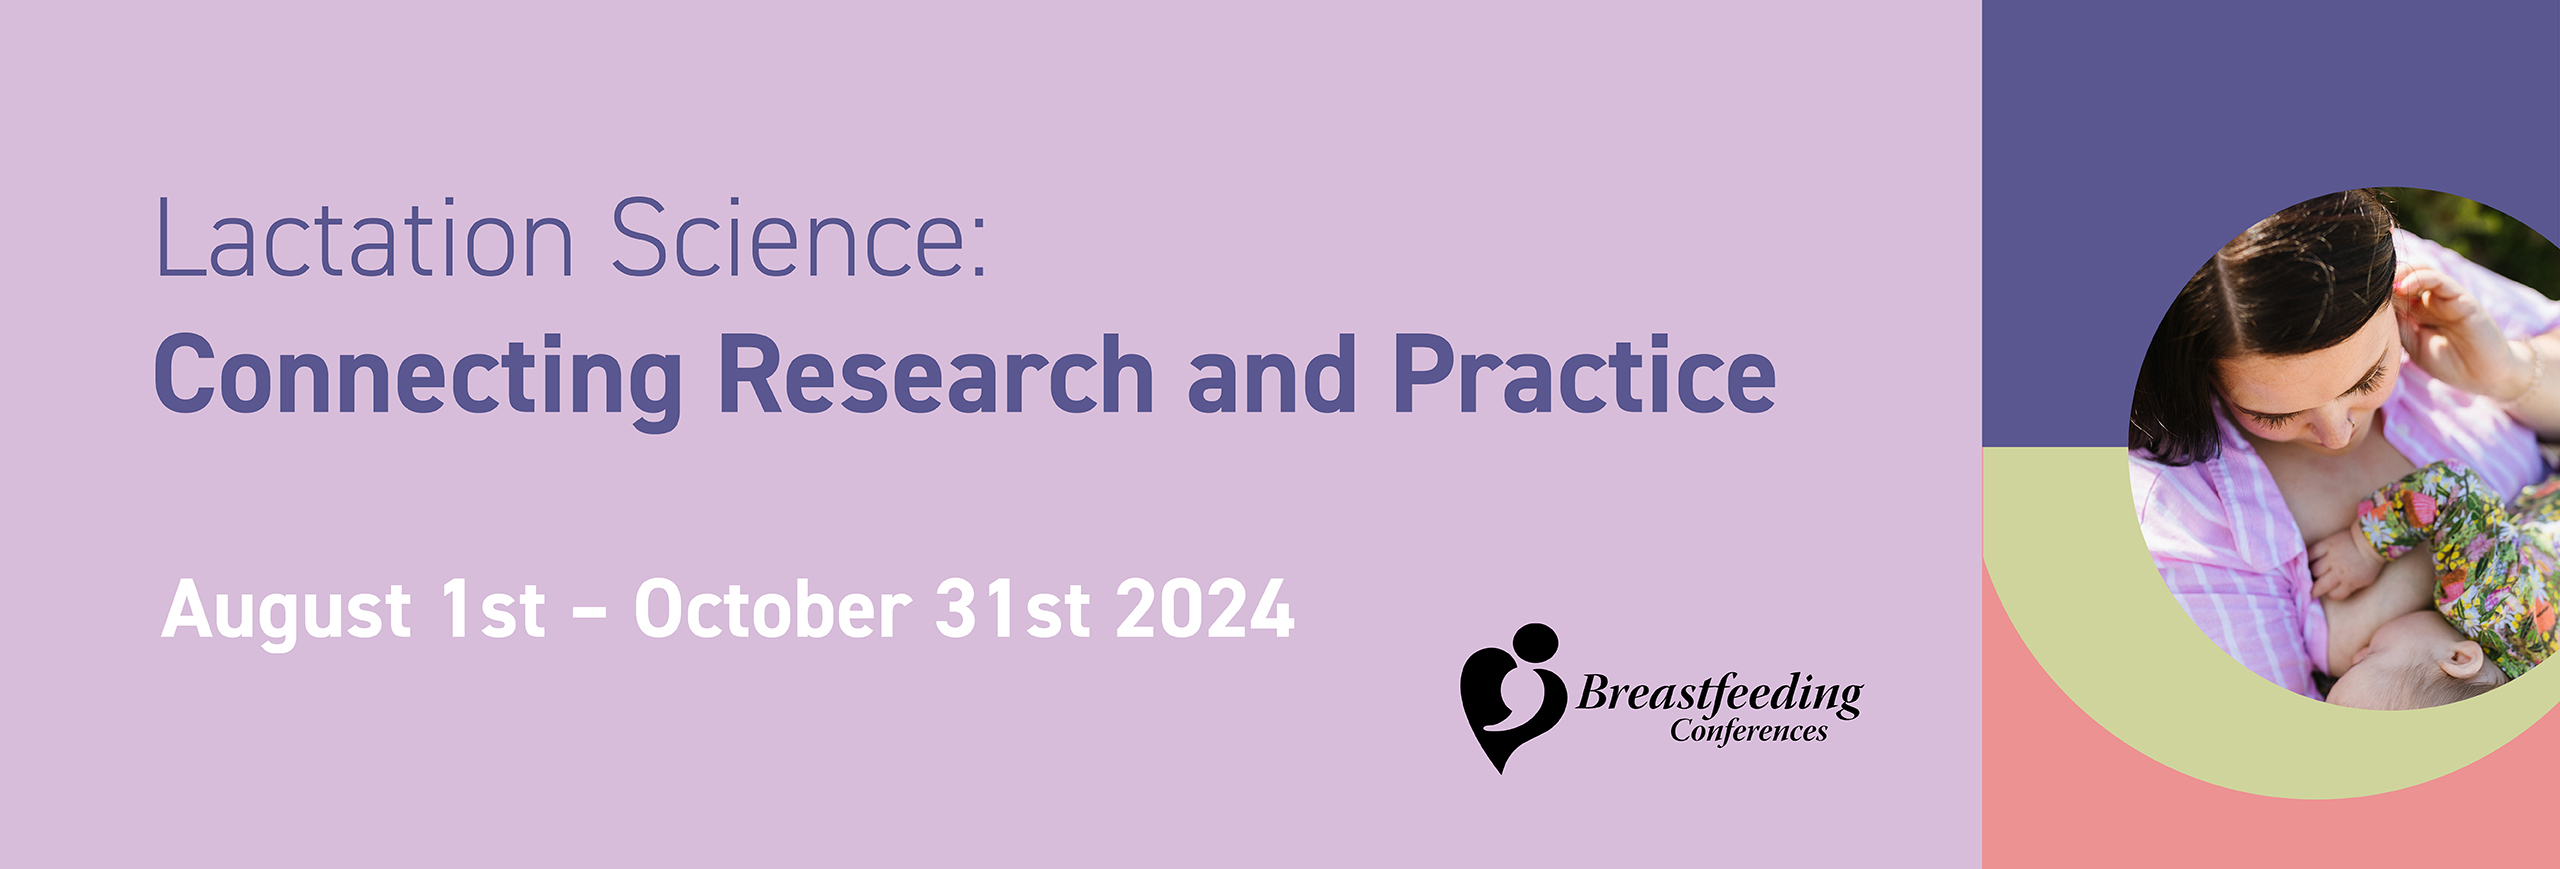 Lactation Science: Connecting Research and Practice